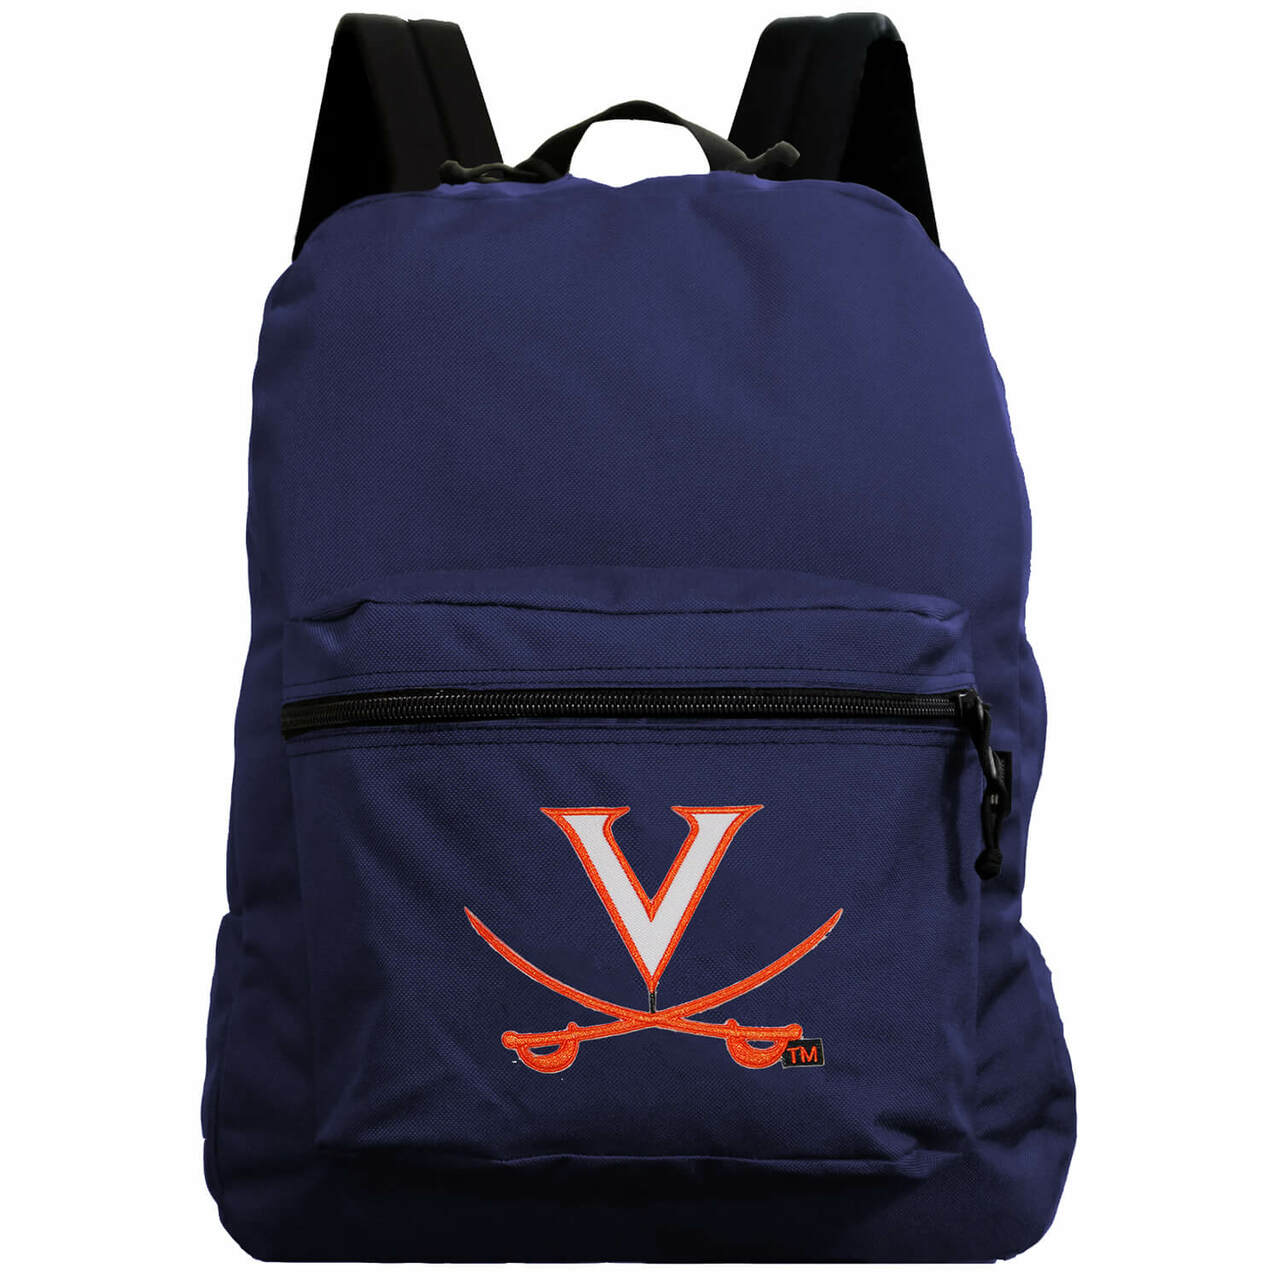 Virginia Cavaliers Made in the USA premium Backpack